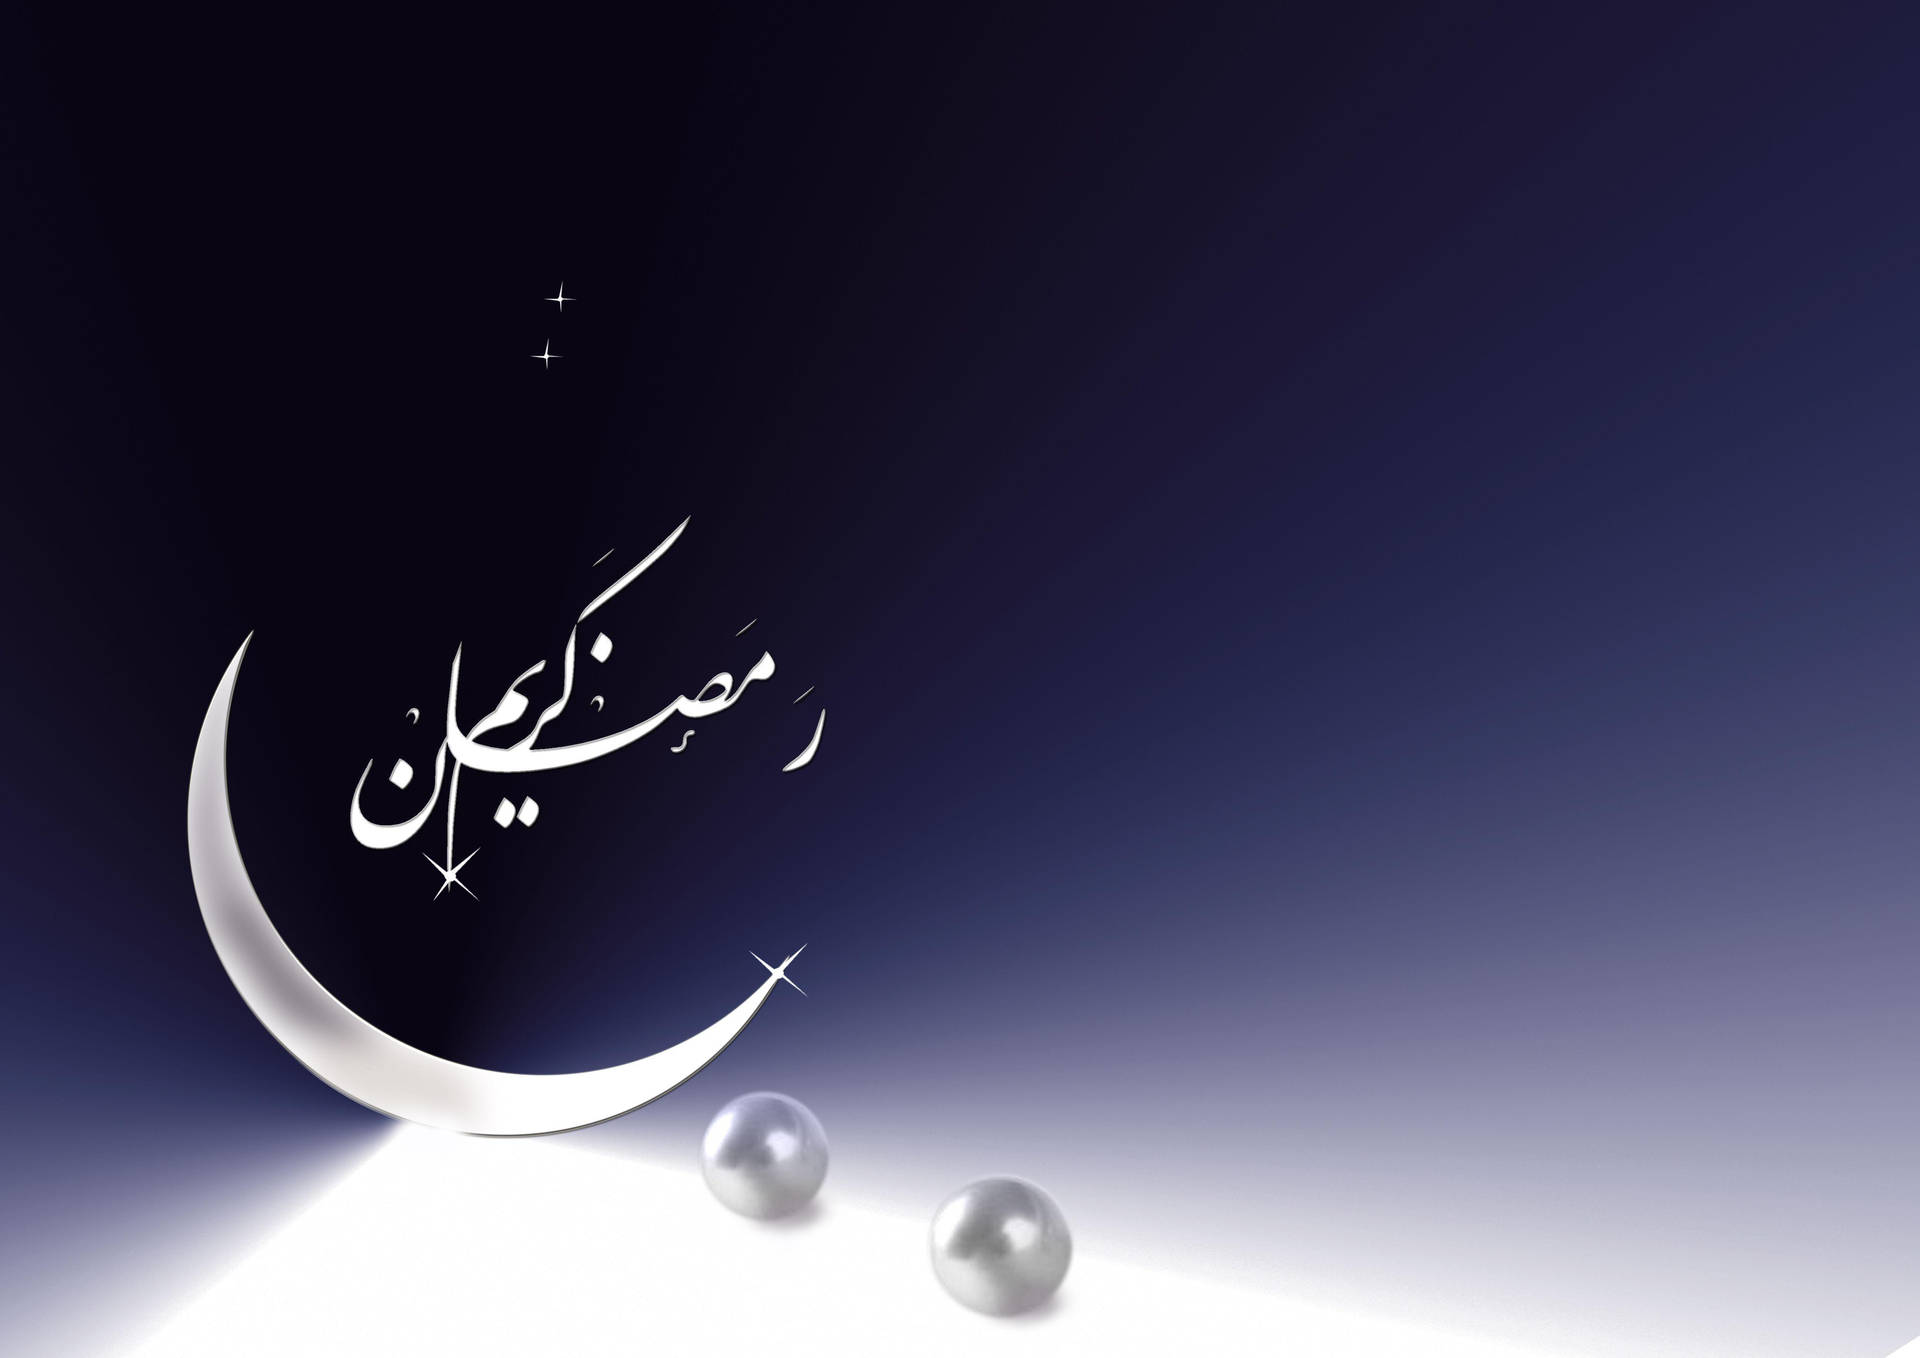 Ramadan With Pearls And Crescent Moon Background